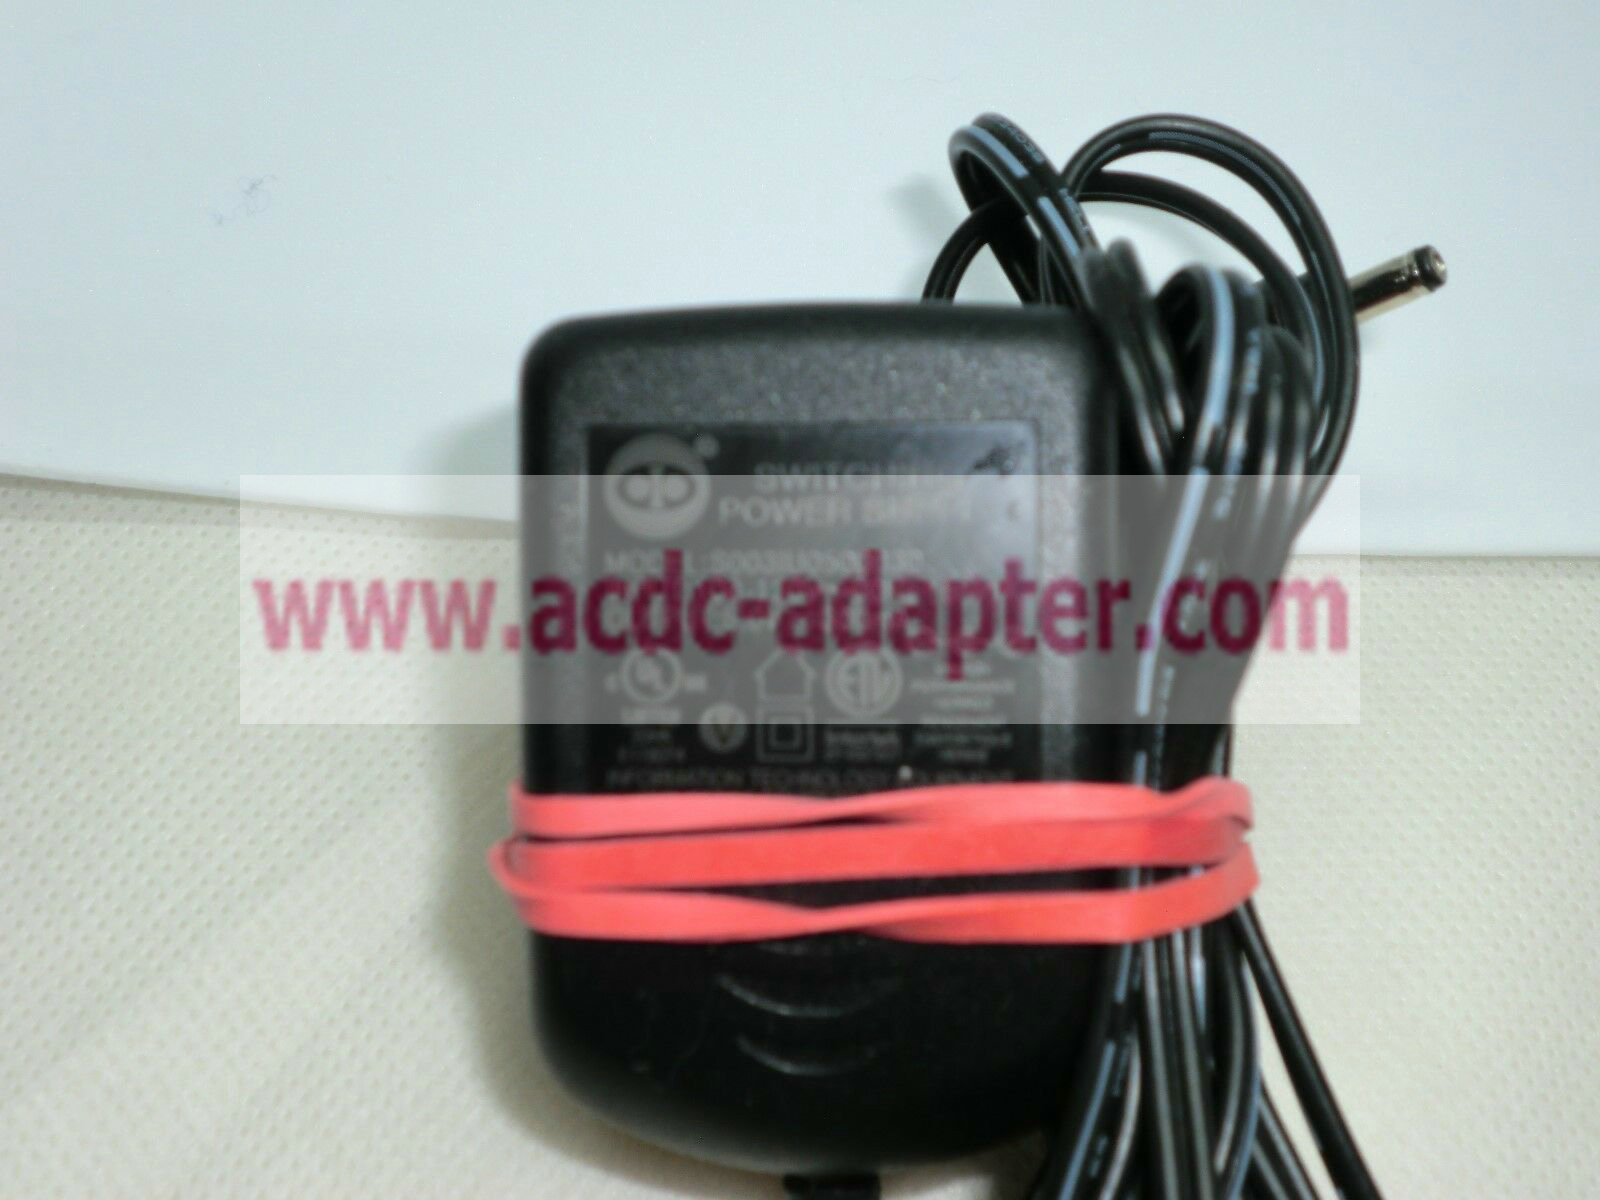 Genuine DC5V 300mA ac adapter for VTECH AT&T S003IU0500030 SWITCHING POWER SUPPLY - Click Image to Close